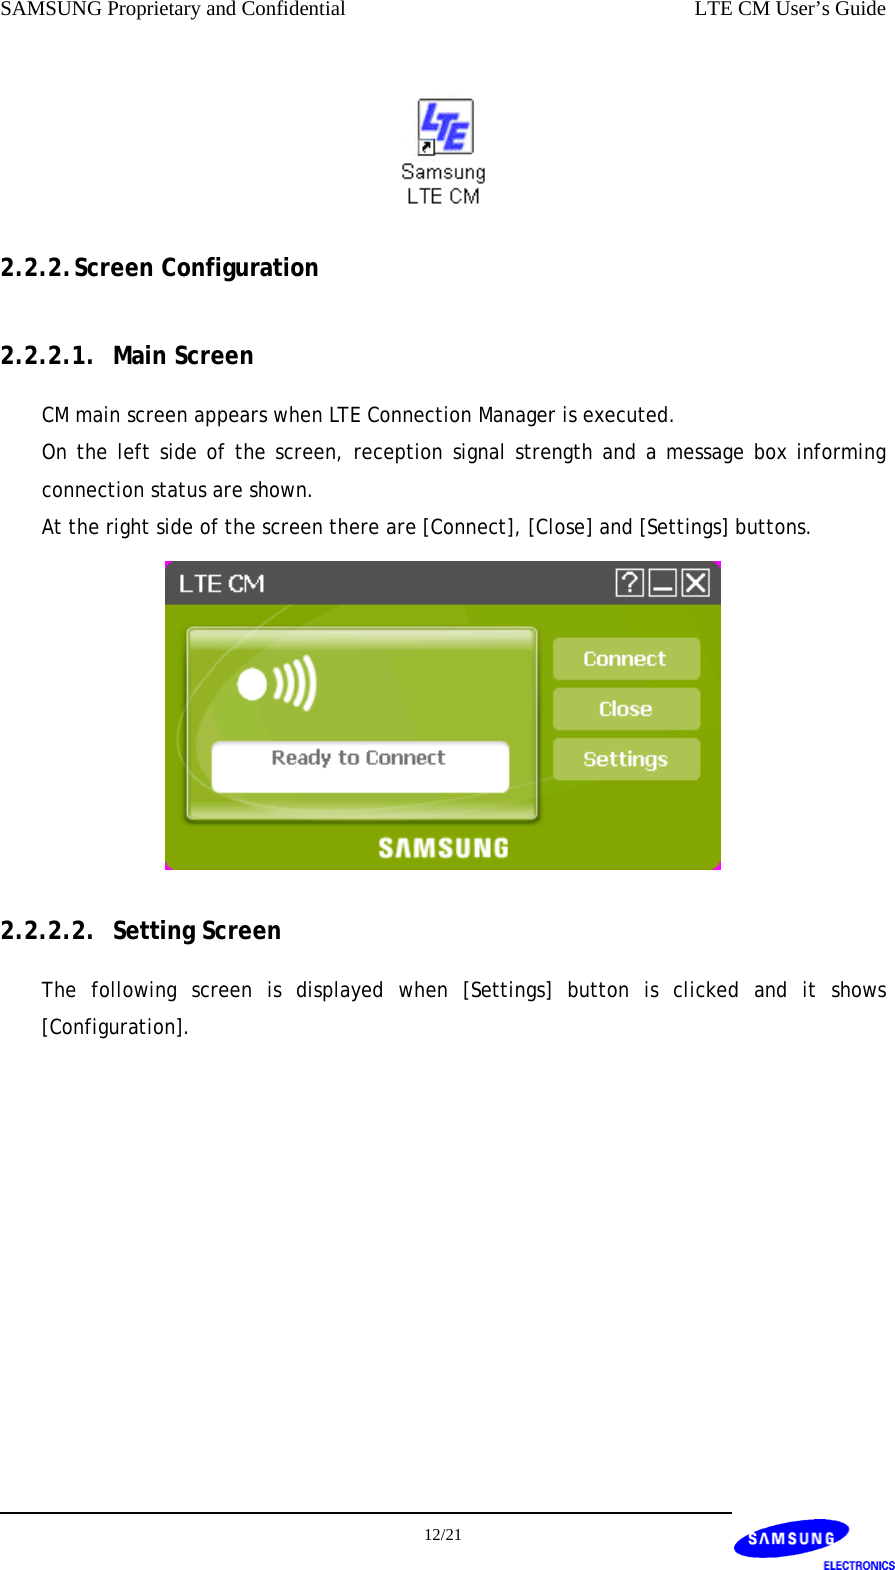 SAMSUNG Proprietary and Confidential    LTE CM User’s Guide  2.2.2. Screen Configuration 2.2.2.1. Main Screen CM main screen appears when LTE Connection Manager is executed. On the left side of the screen, reception signal strength and a message box informing connection status are shown. At the right side of the screen there are [Connect], [Close] and [Settings] buttons.  2.2.2.2. Setting Screen The following screen is displayed when [Settings] button is clicked and it shows [Configuration].  12/21  